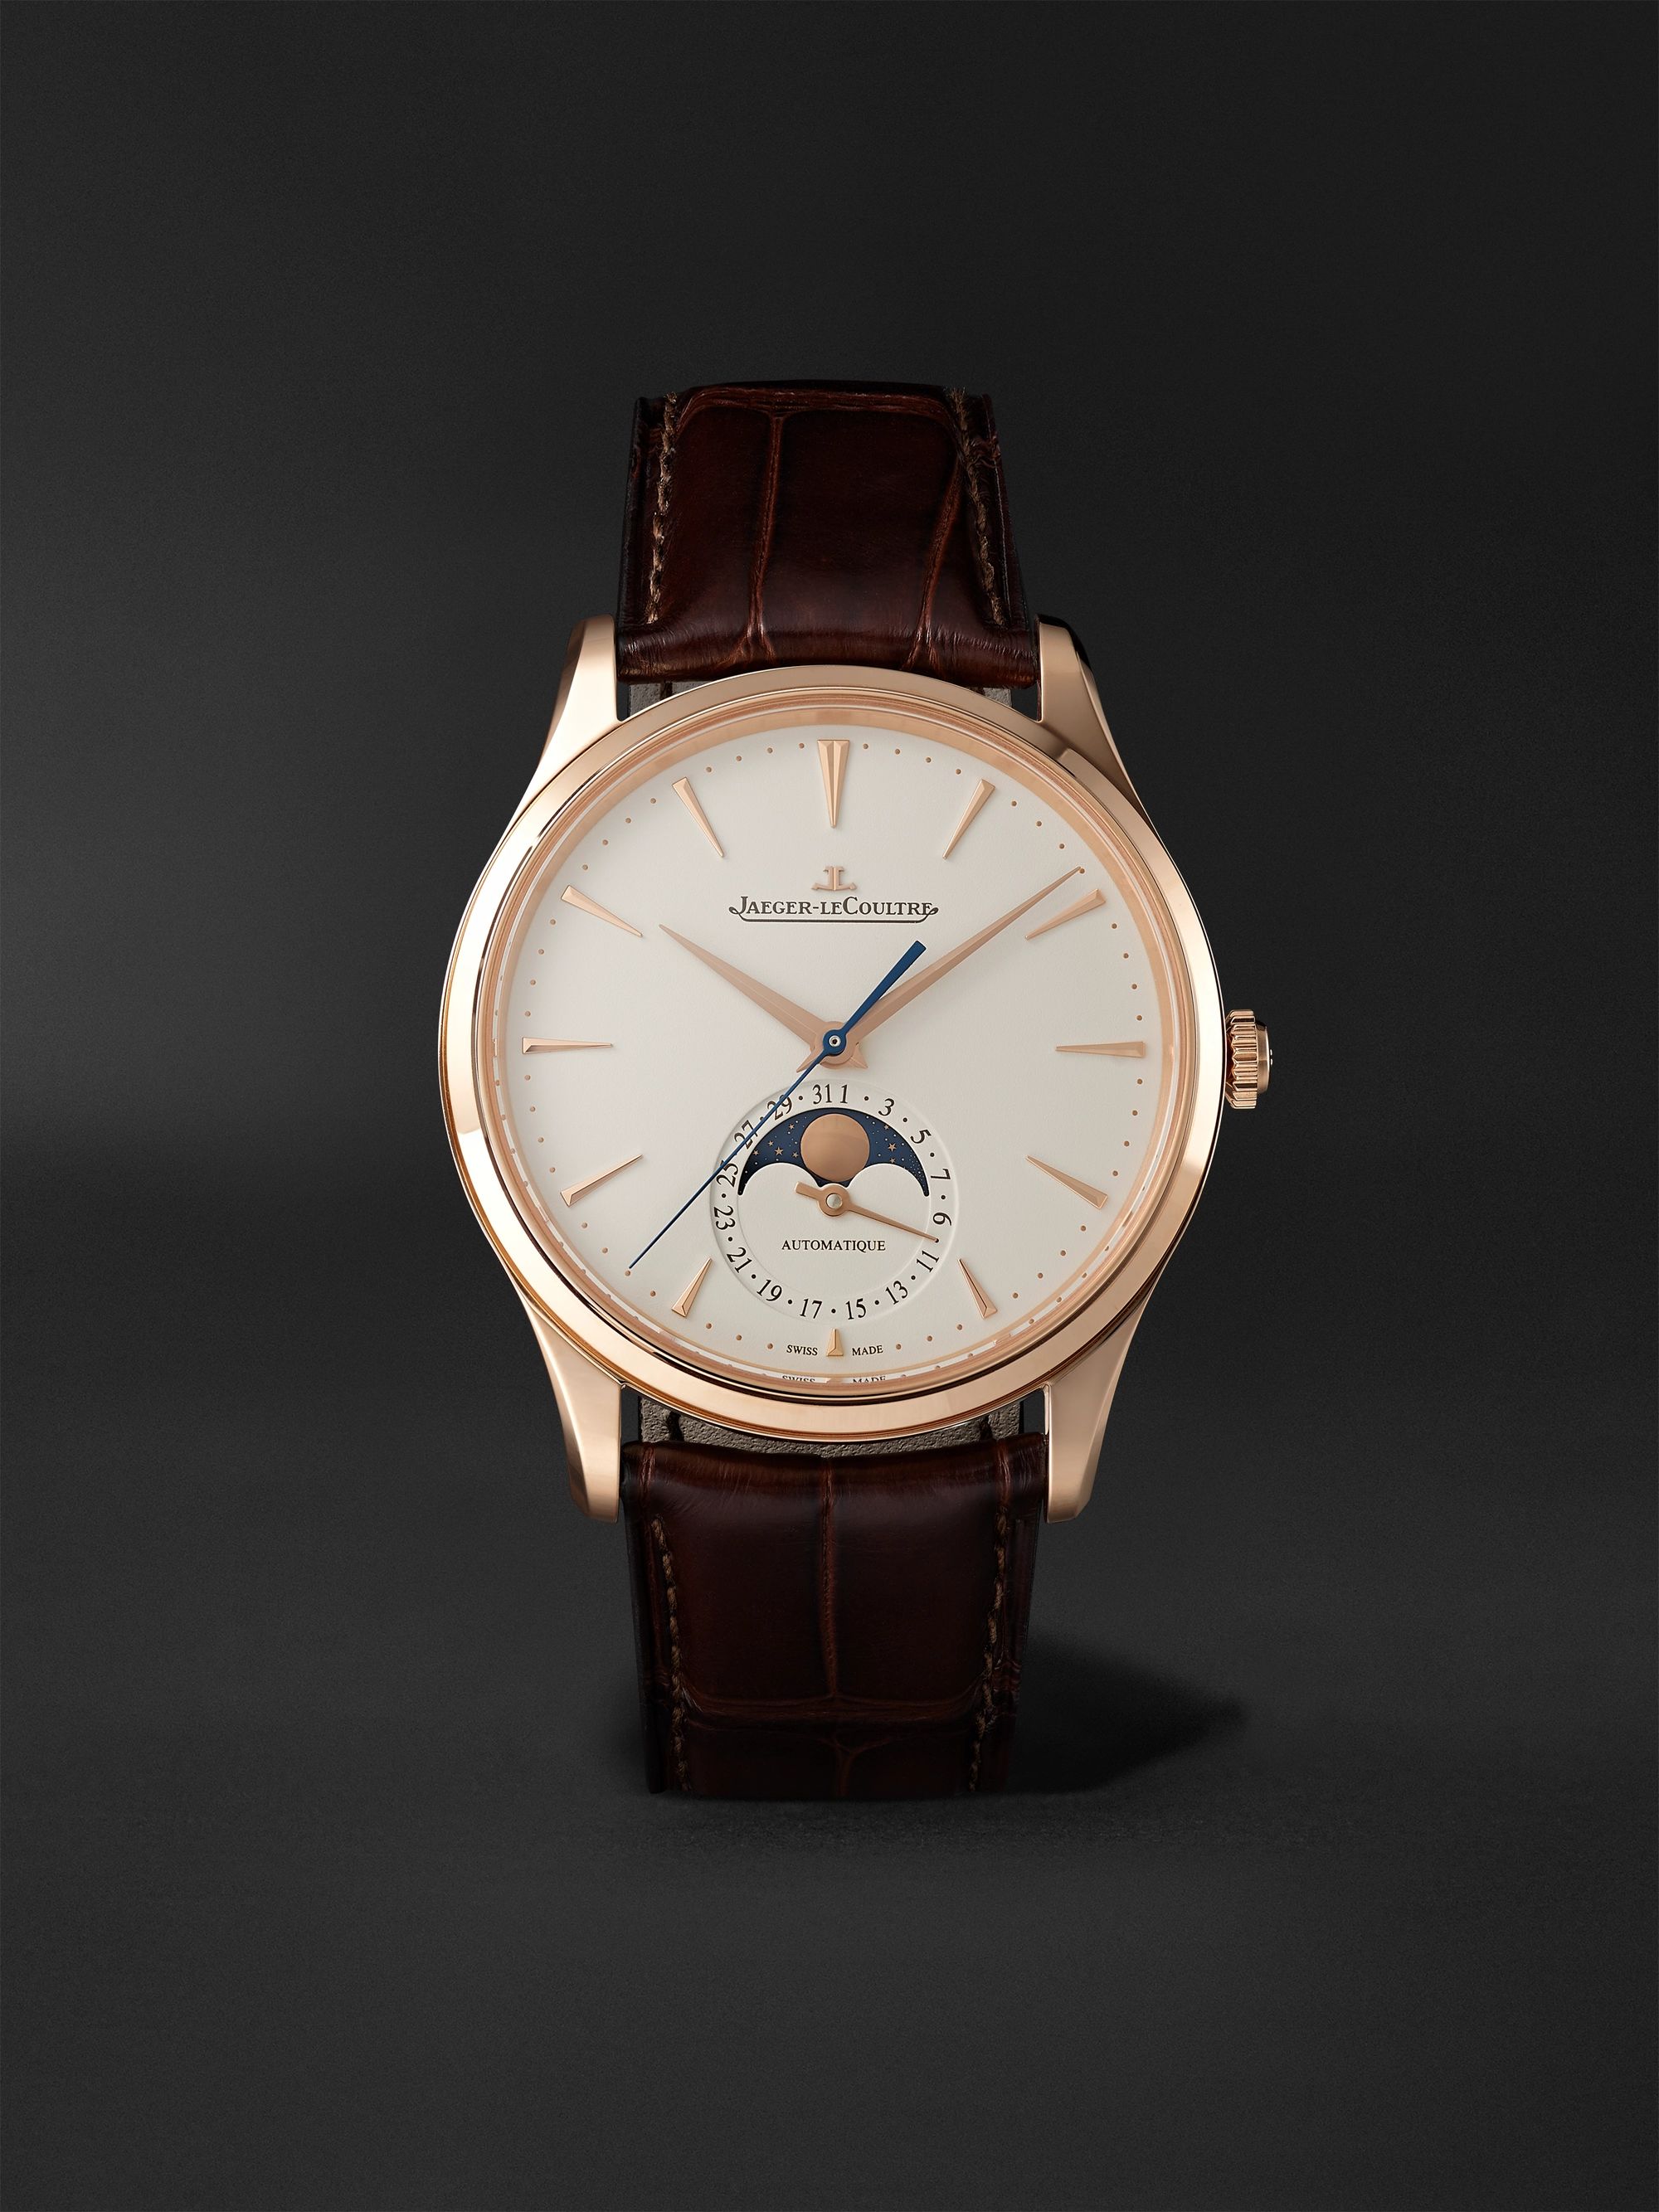 JAEGER-LECOULTRE Master Ultra Thin Automatic Moon-Phase 39mm 18-Karat Pink Gold and Alligator Watch, Ref. No. 1362510